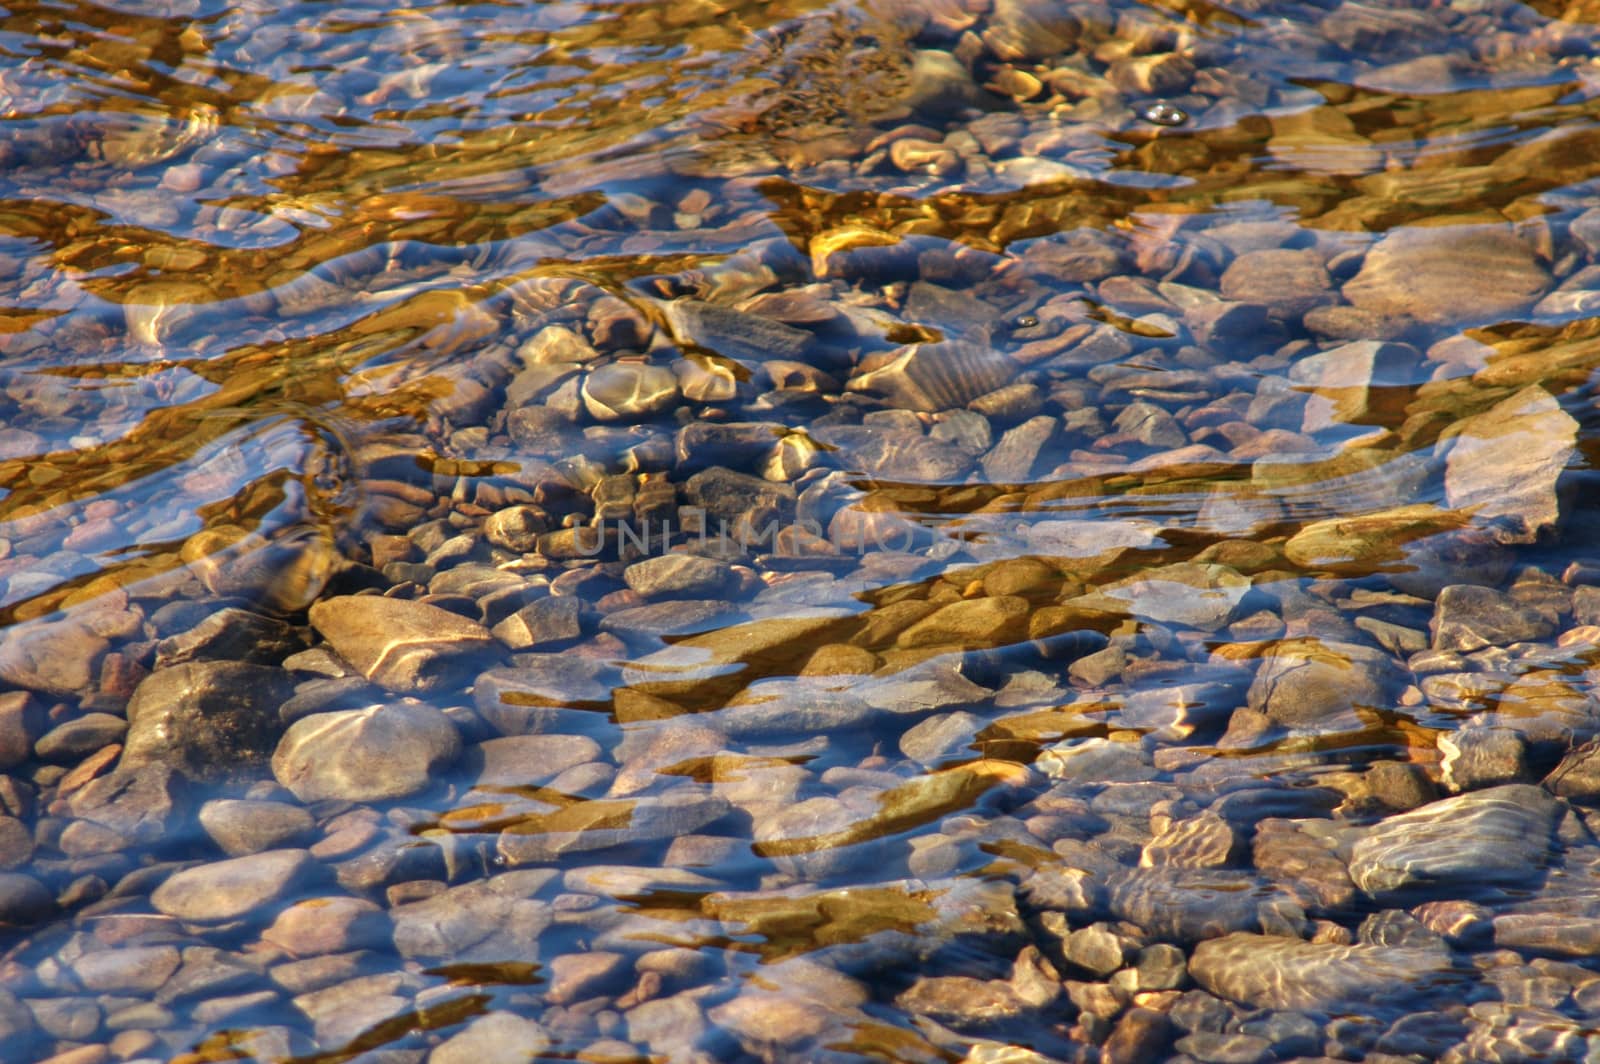 Background image of some smooth stones in a river